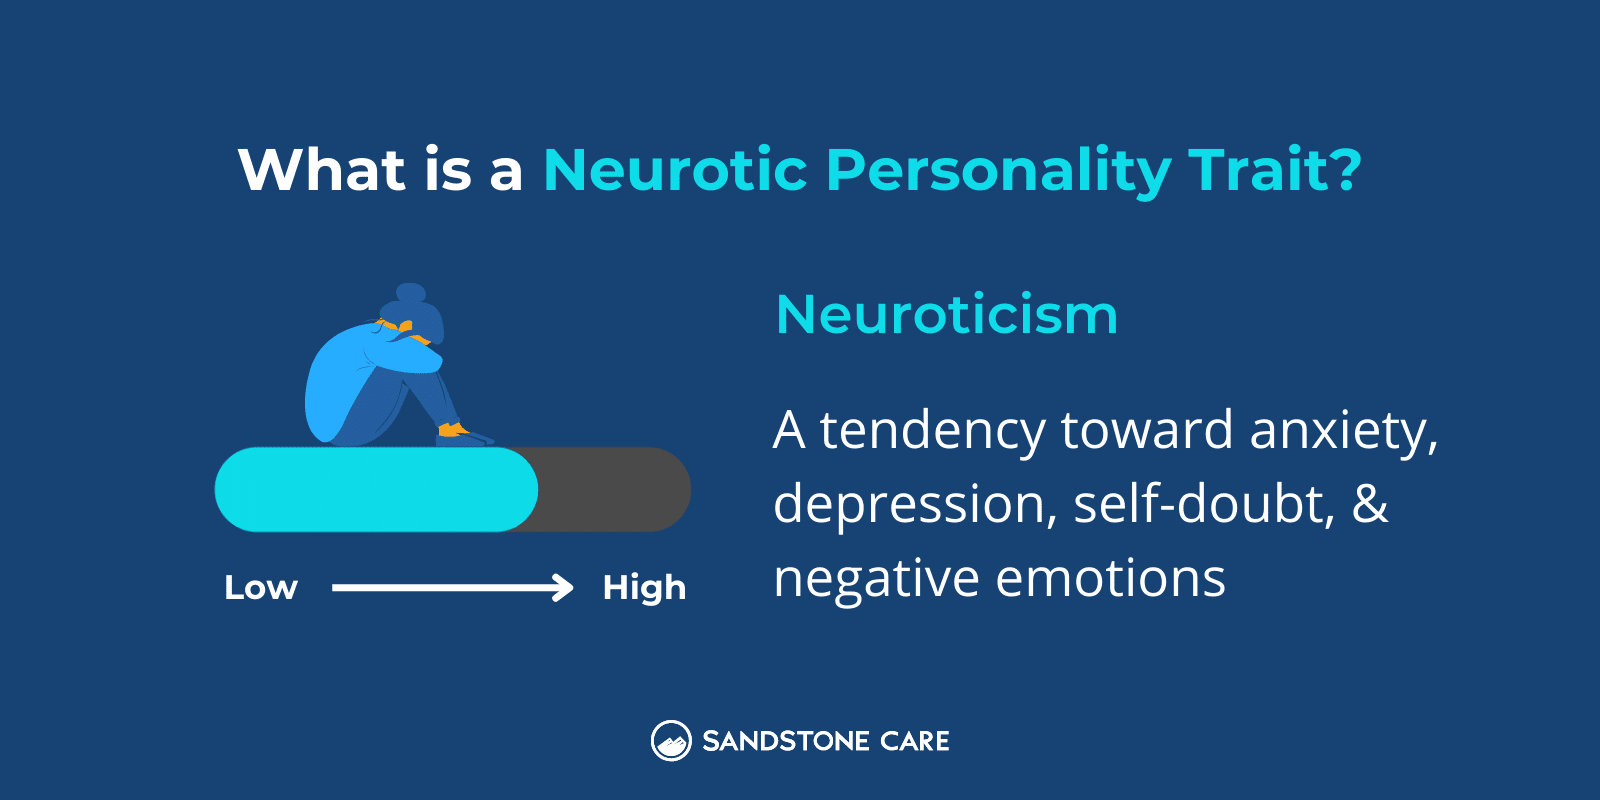 What is a Neurotic Personality Trait? written above 1) a bar showing neuroticism tendency with a girl being depressed next to 2) a paragraph explaining what neuroticism is